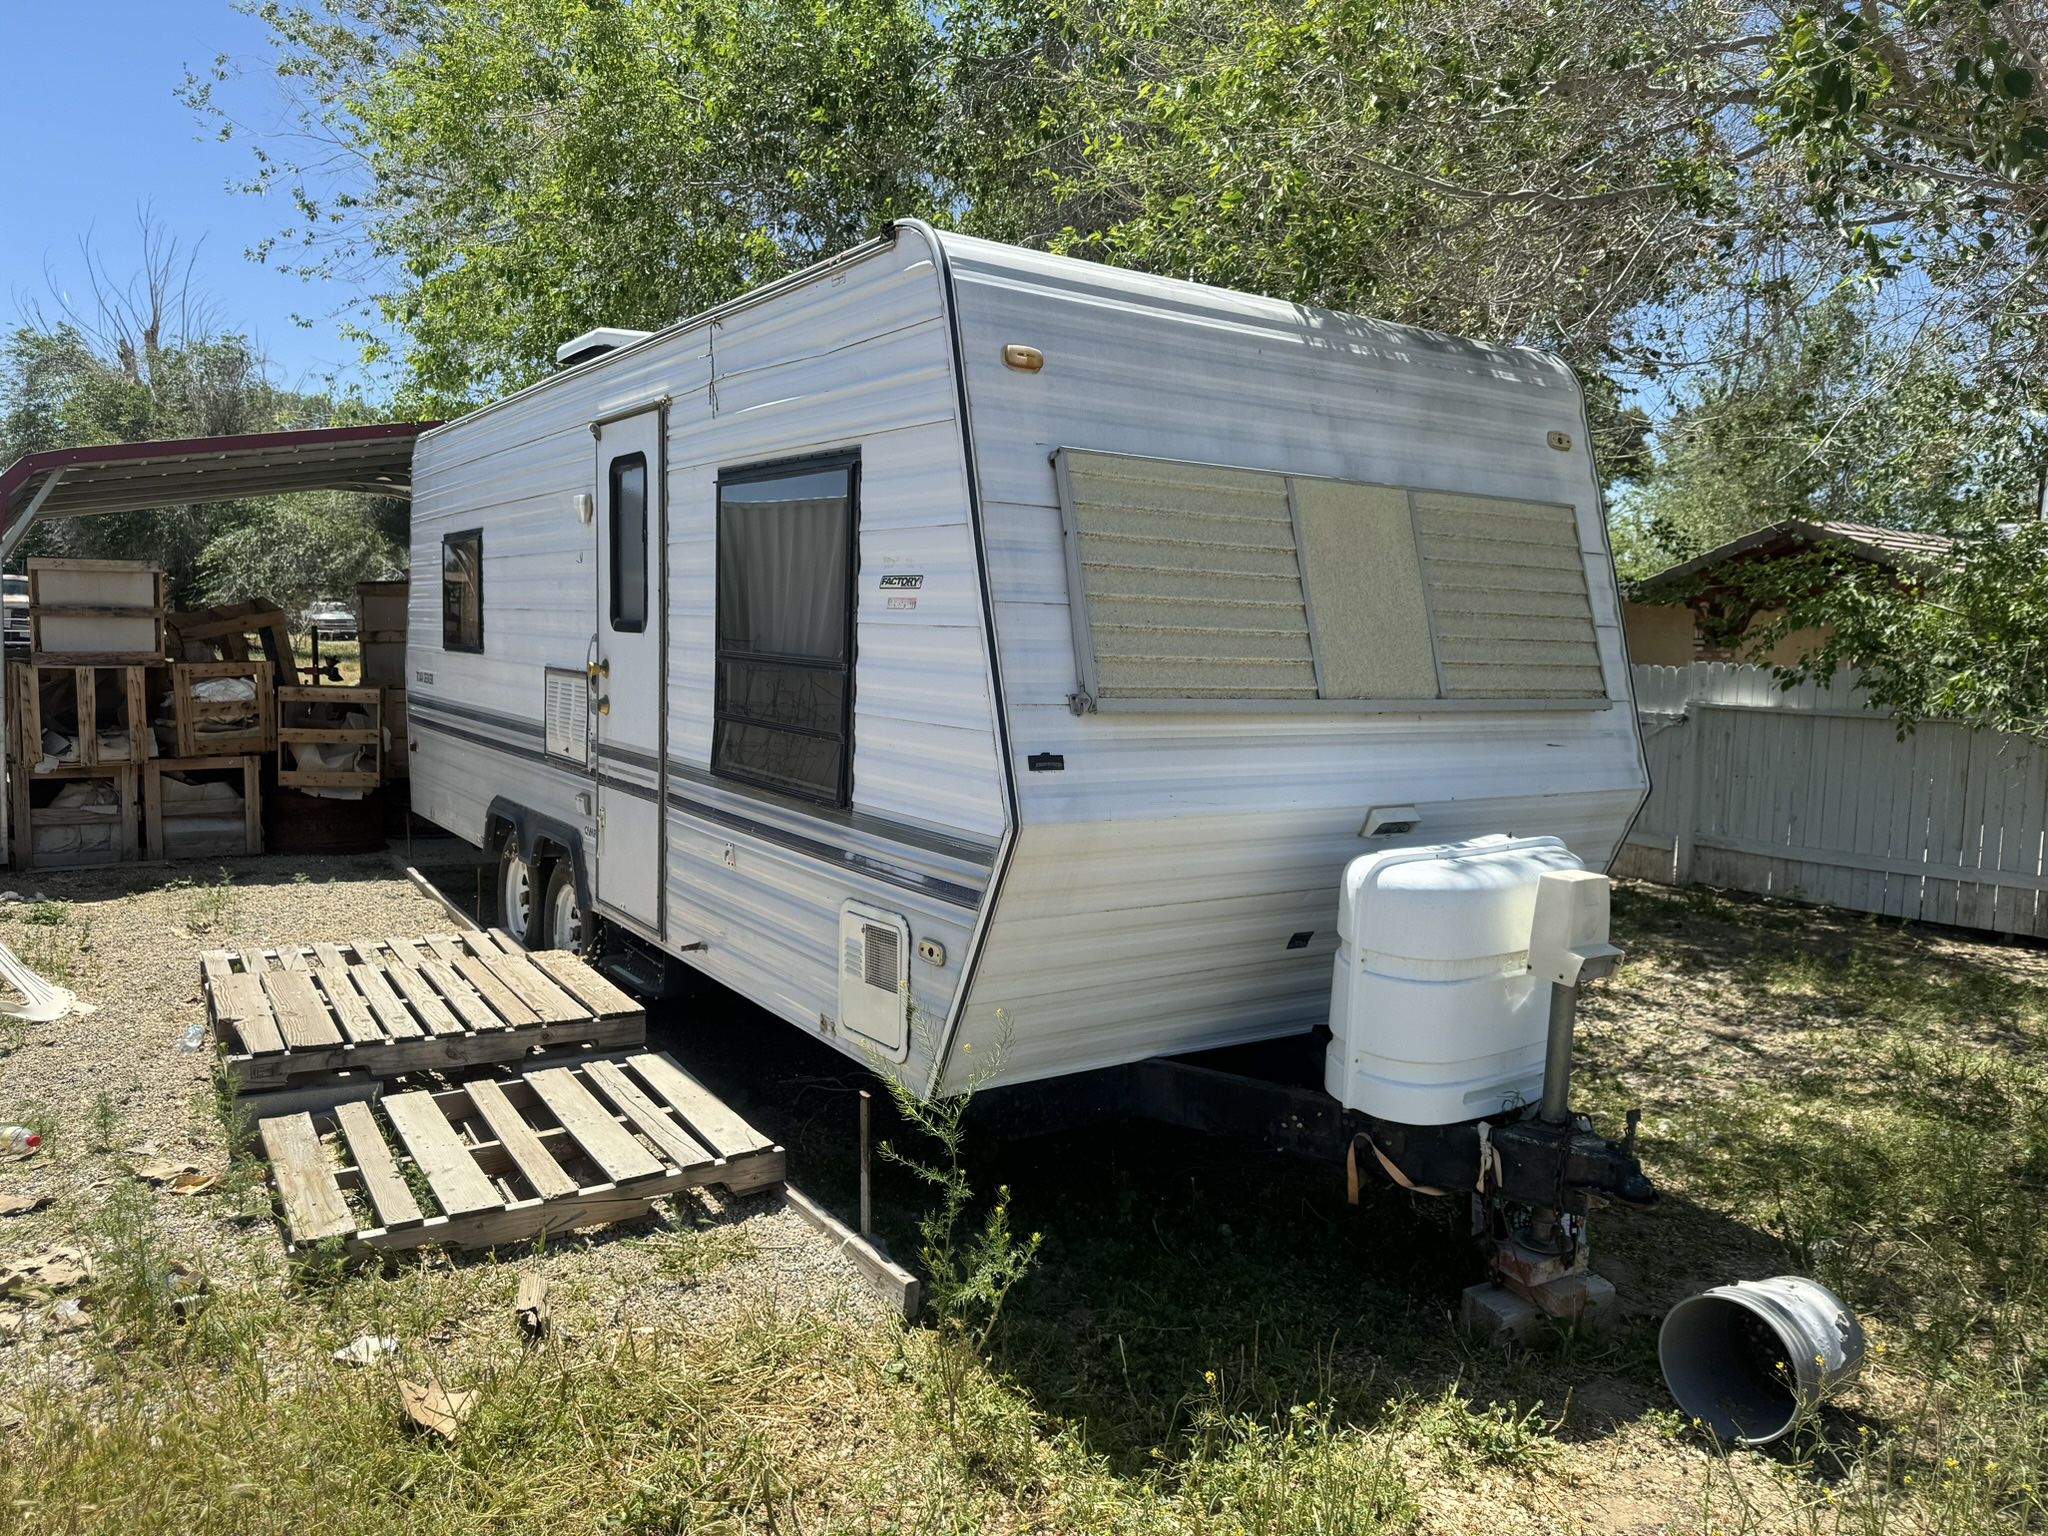 Travel Trailer 24 Footer 